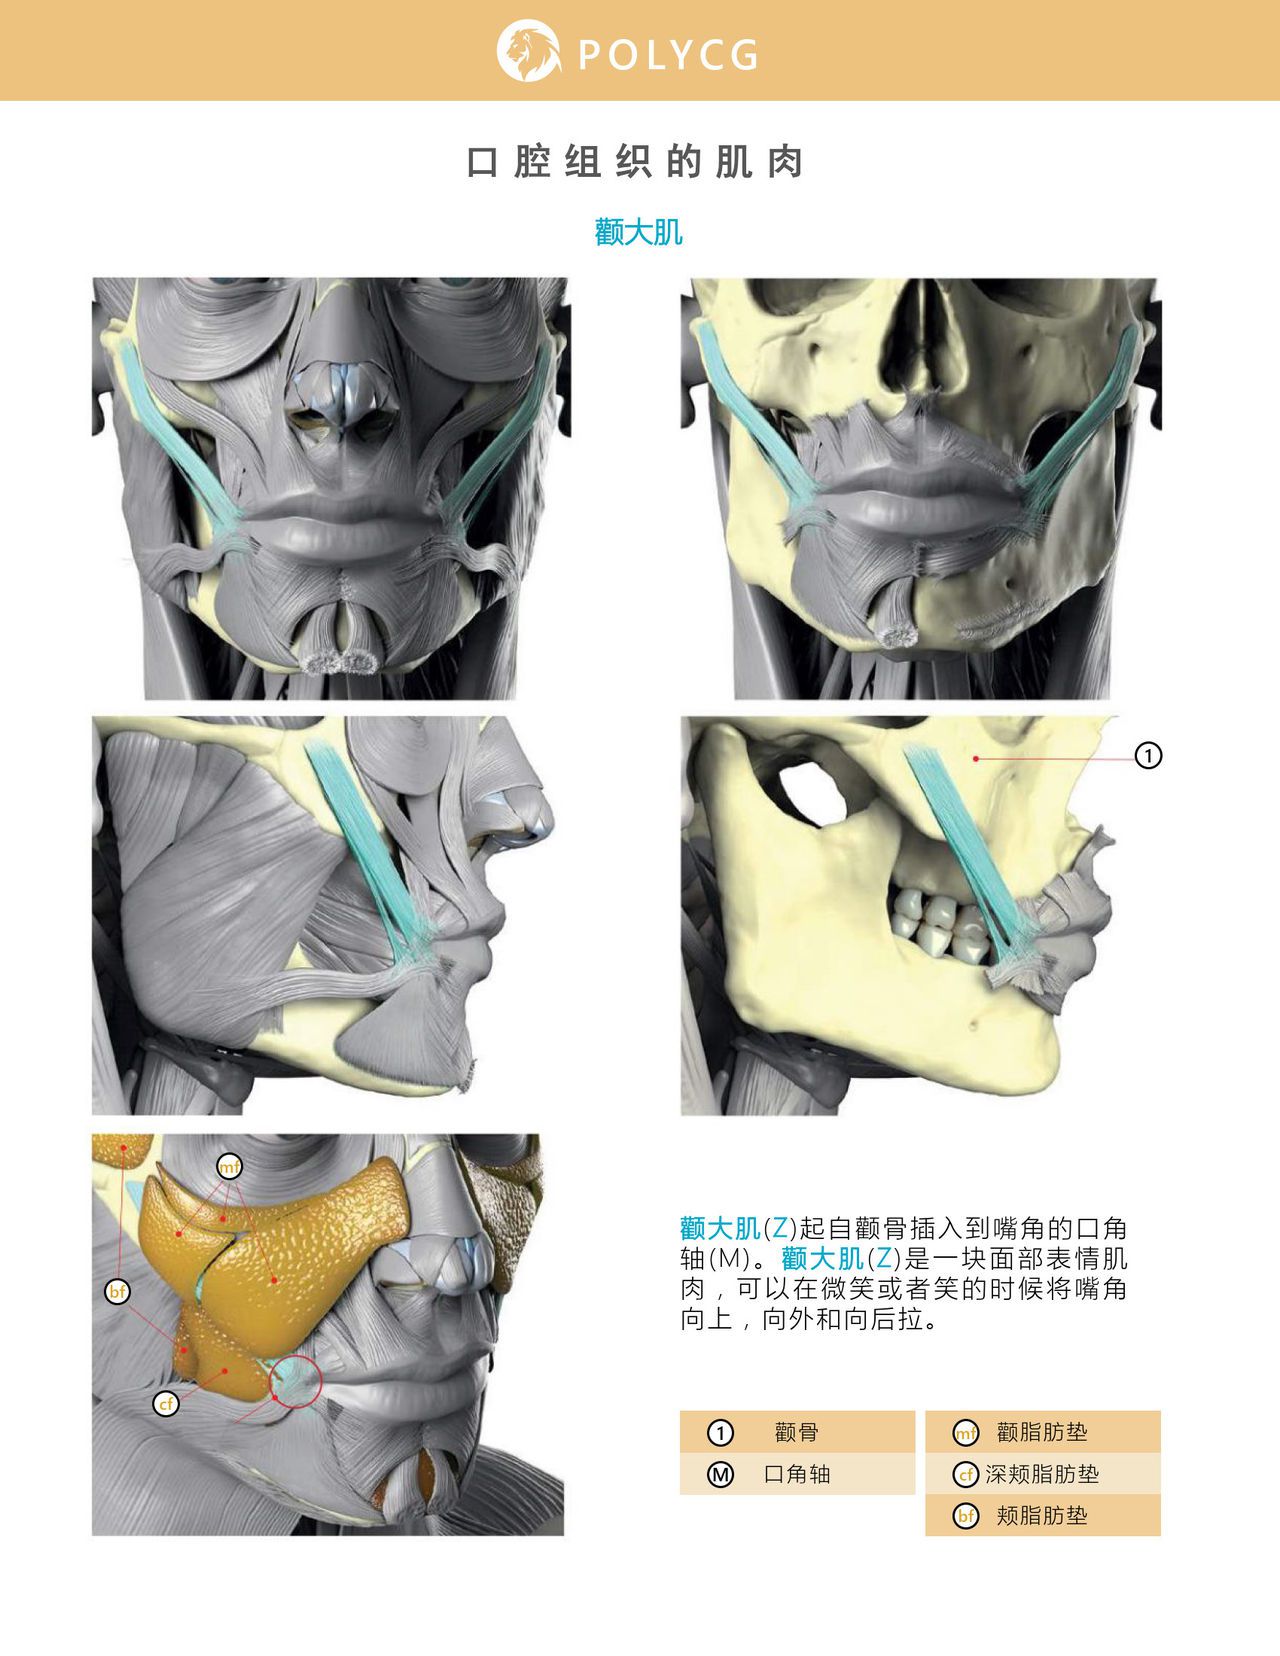 Uldis Zarins-Anatomy of Facial Expression-Exonicus [Chinese] 面部表情艺用解剖 [中文版] 104